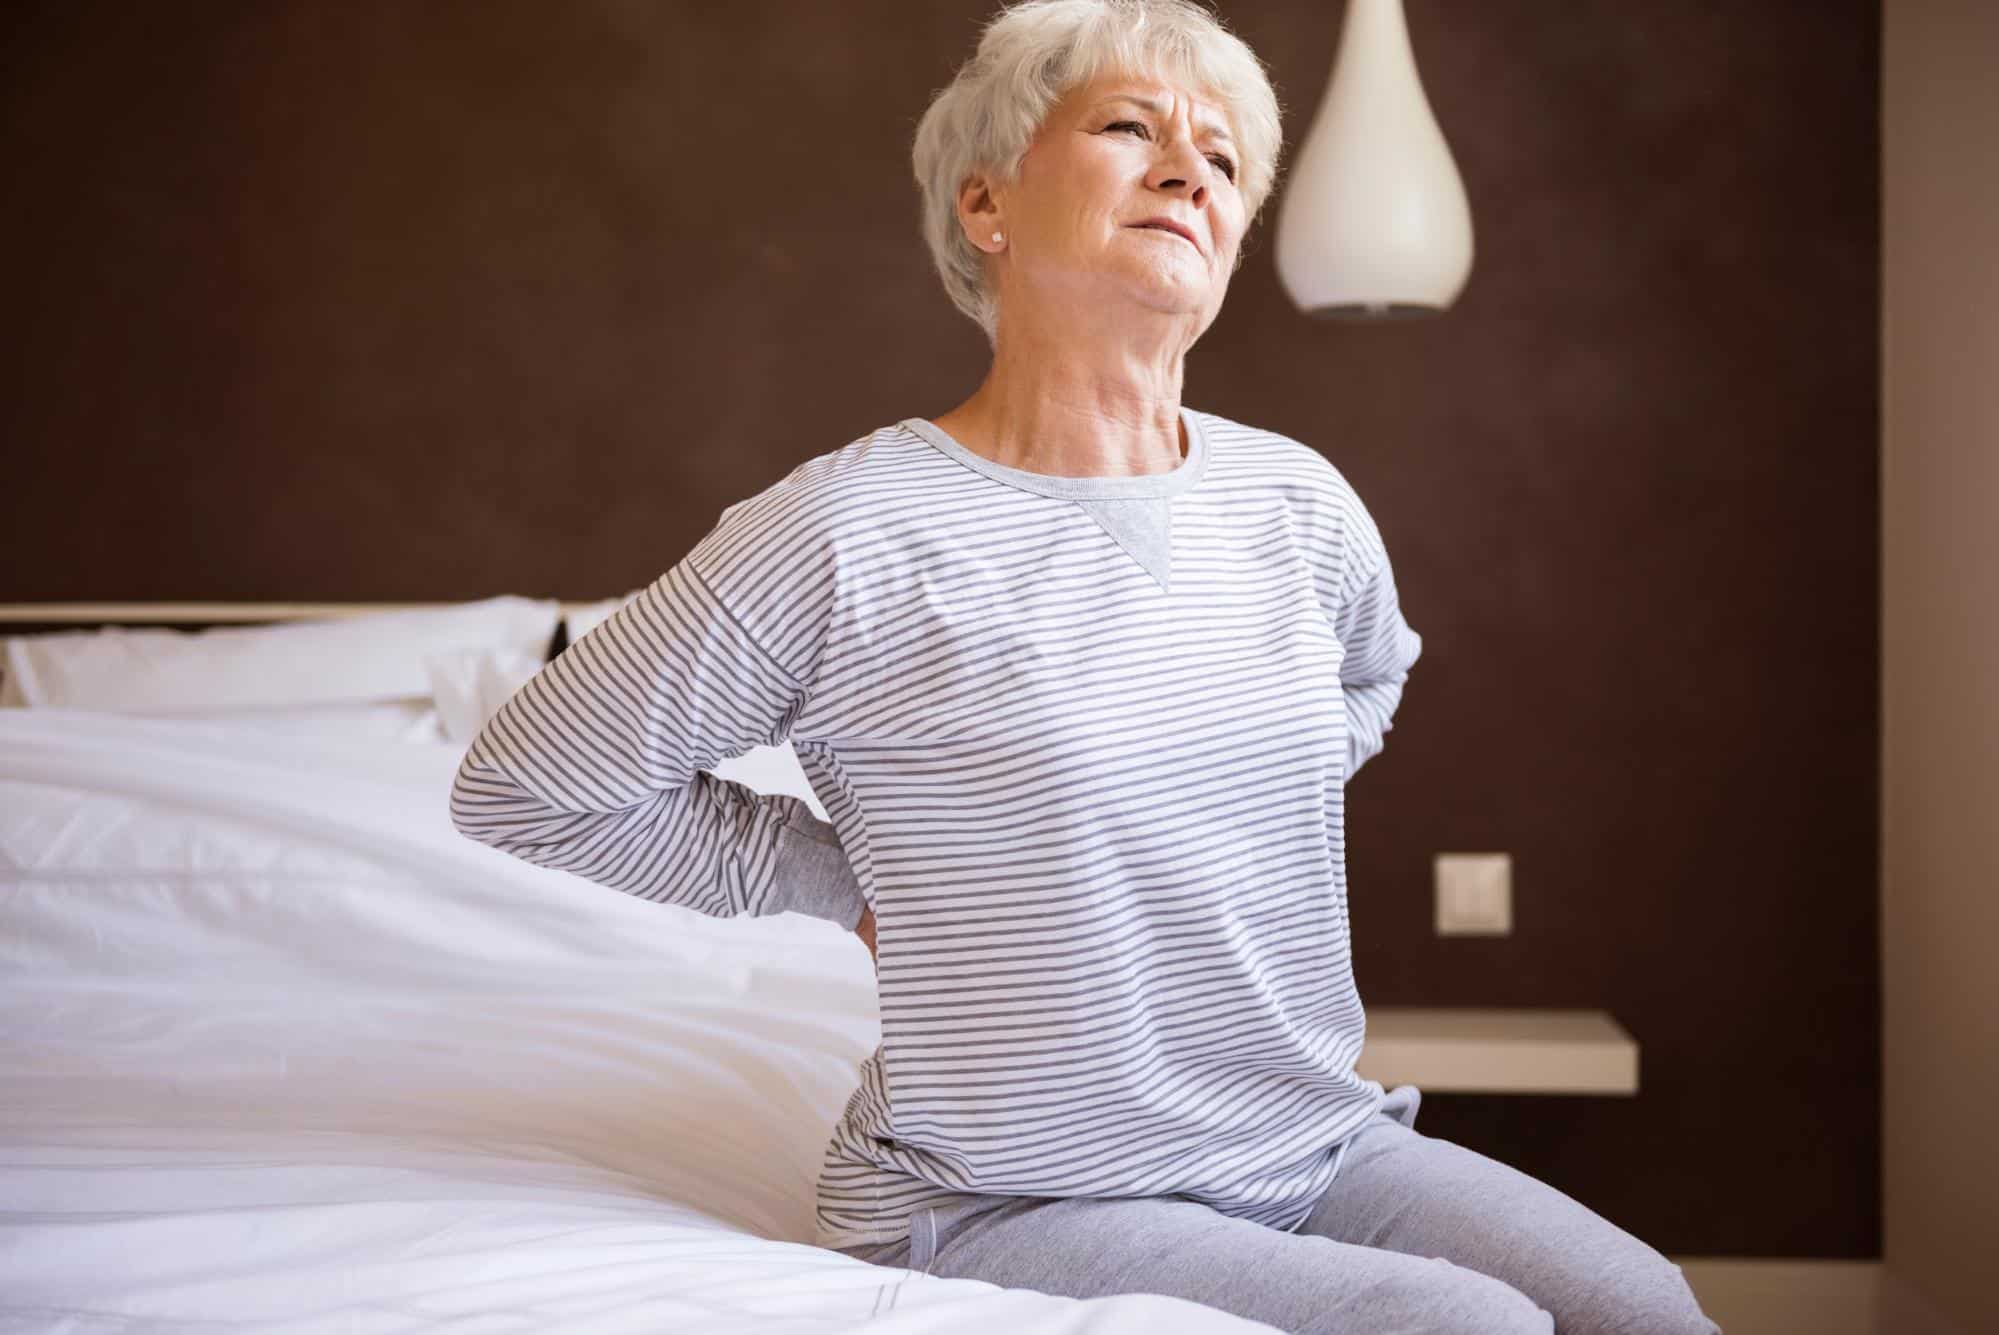 joint pain in cold weather, an older woman wearing a gray and white striped shirt and gray pants sits on the edge of her bed while she bends her back and has her hands placed on her lower back.